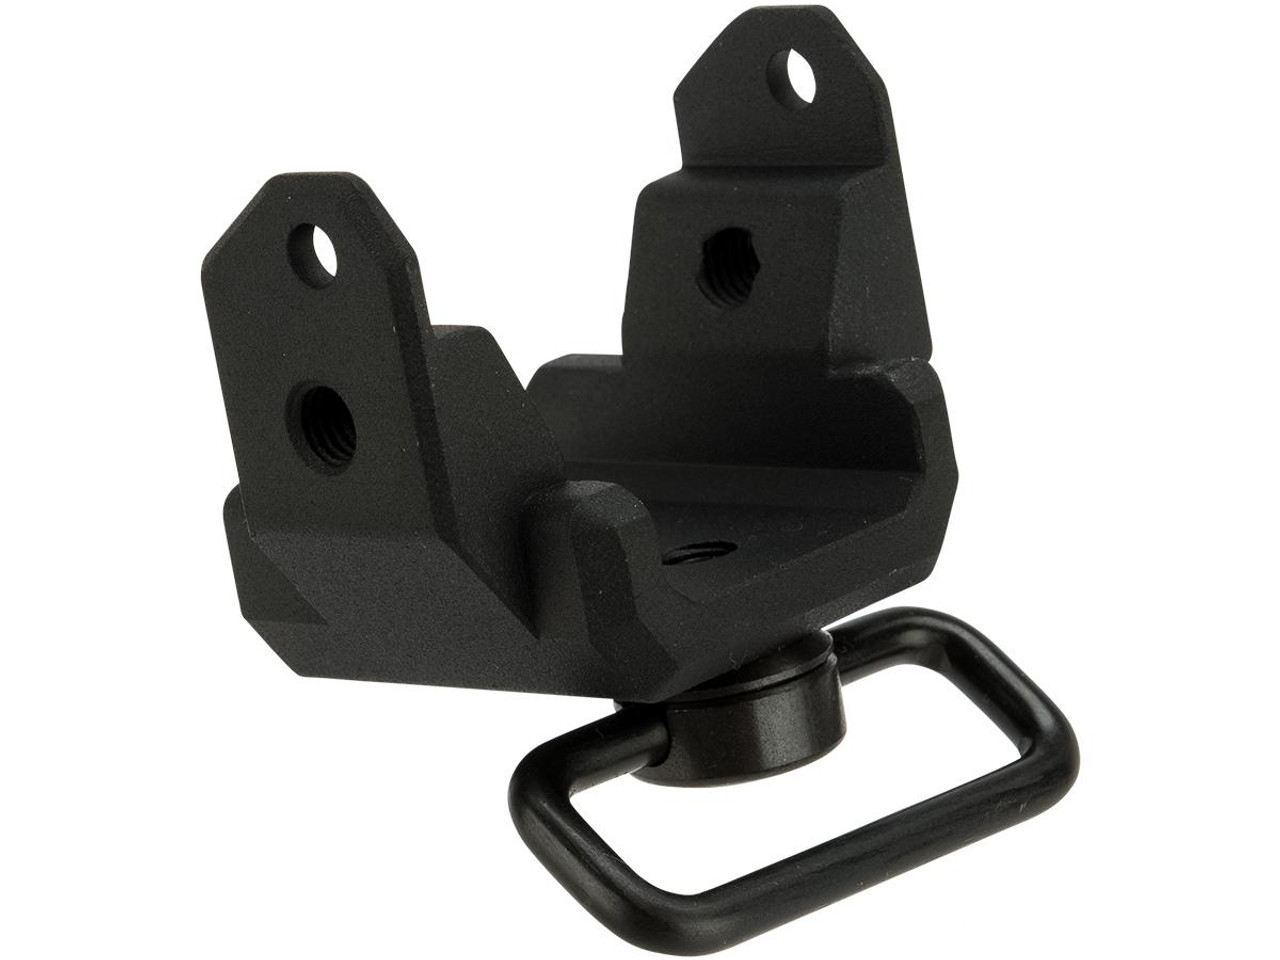 Laylax Sling Swivel for TM MP7A1 Airsoft AEGs